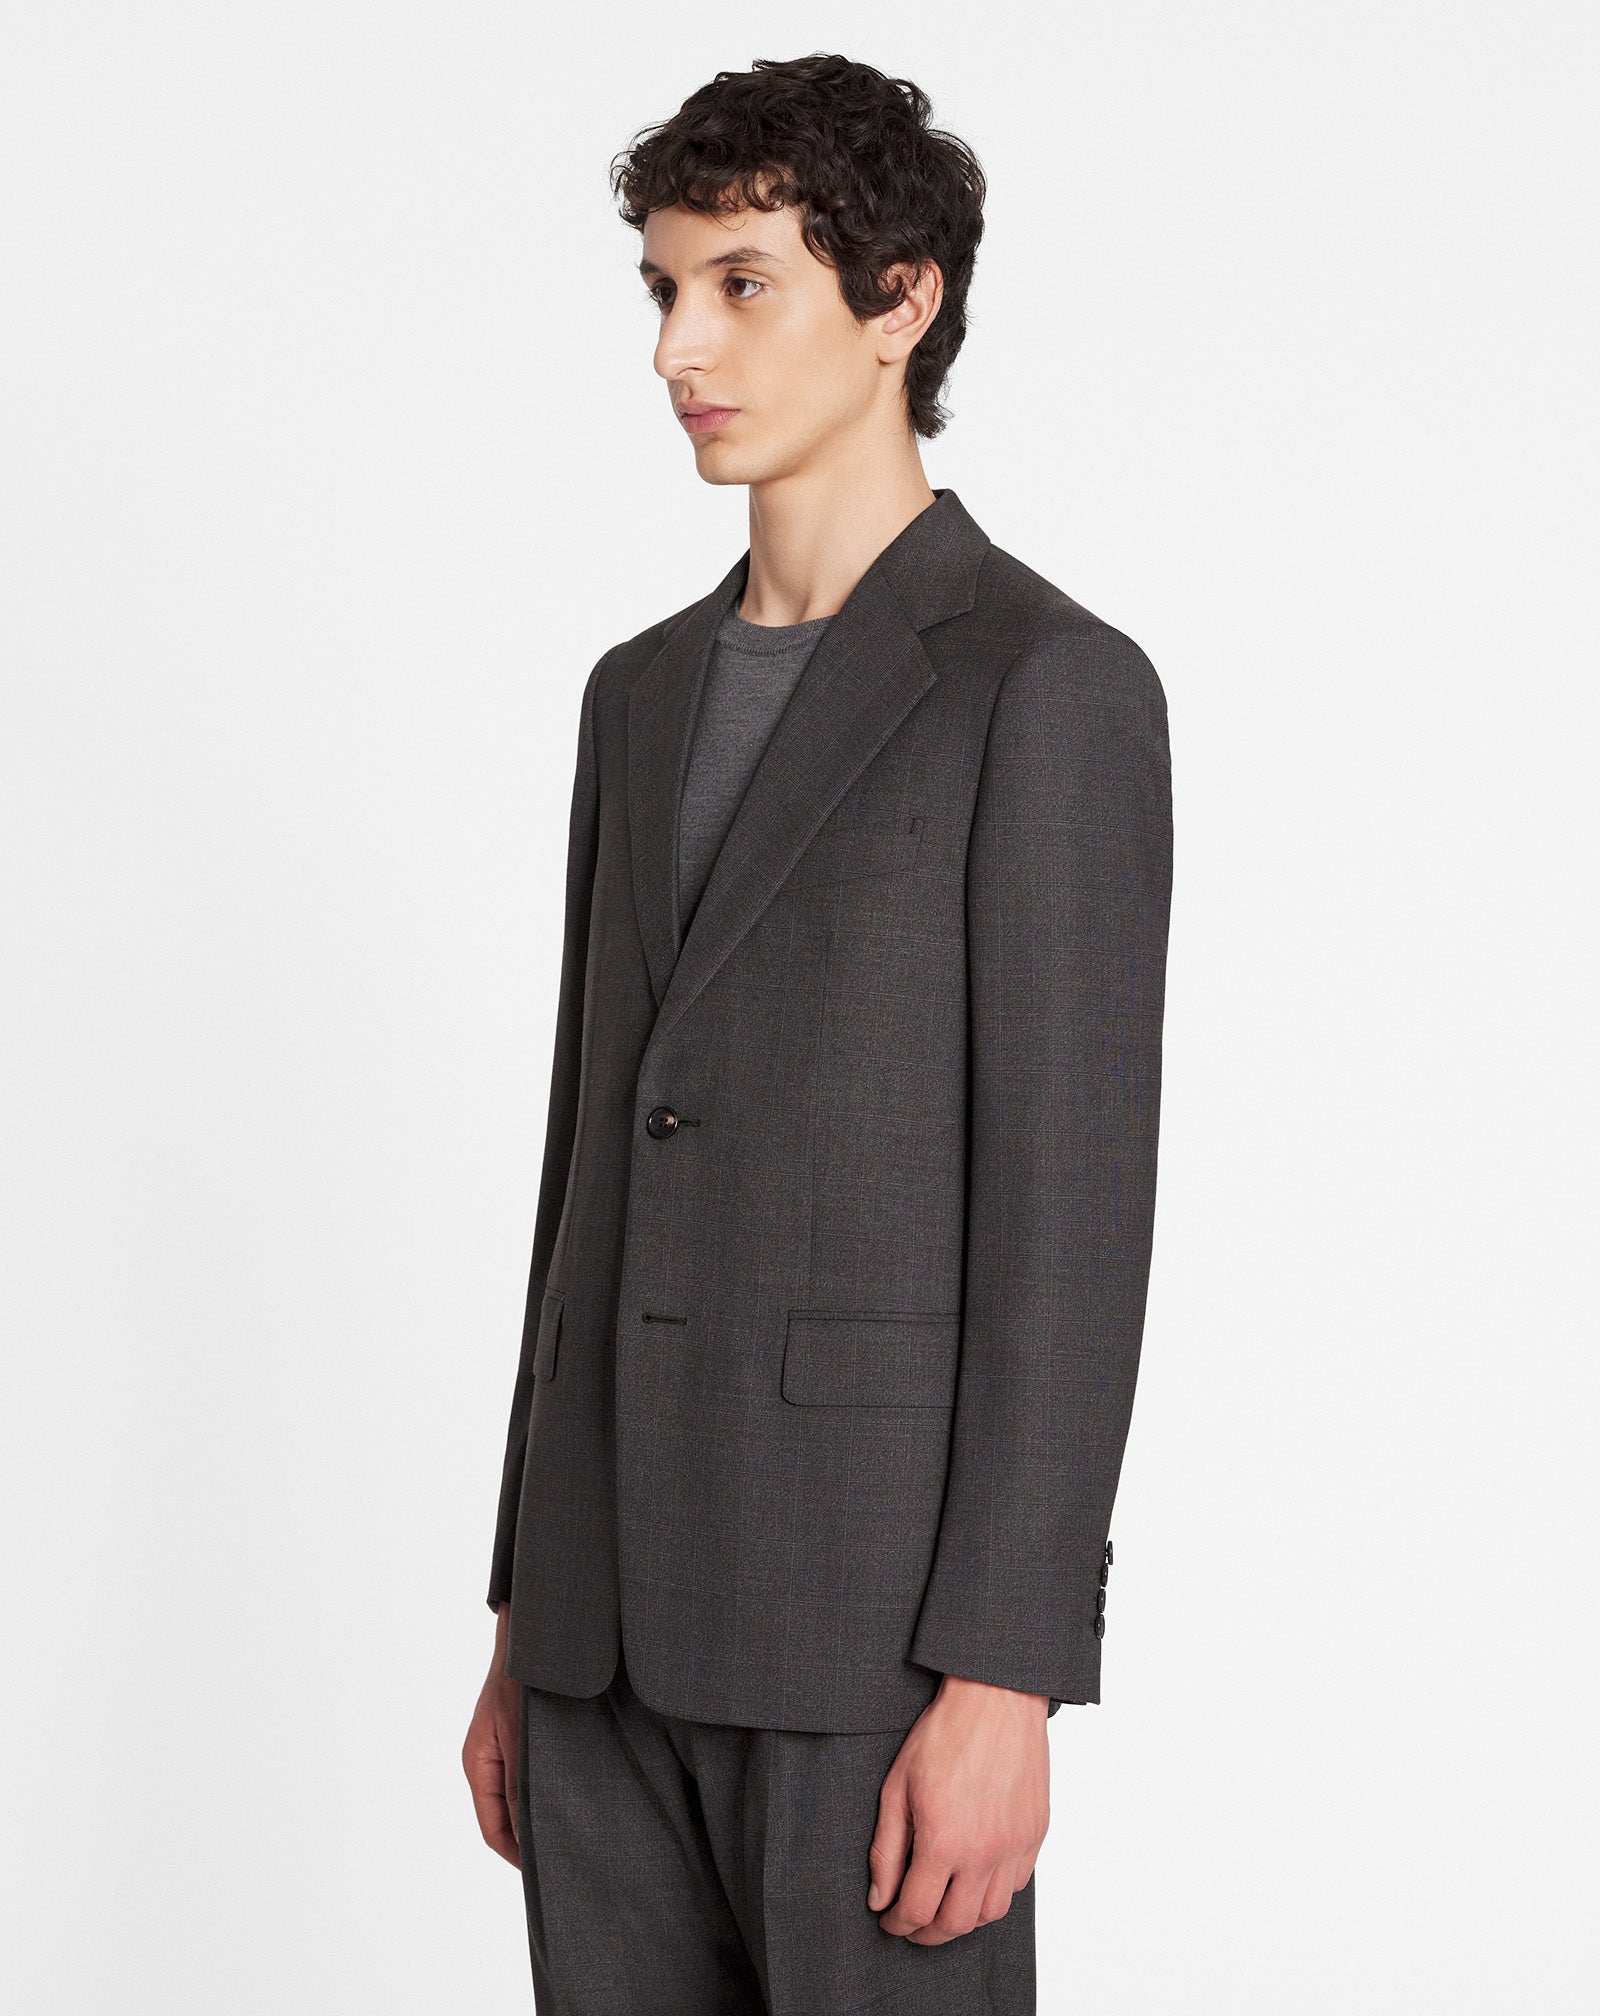 SINGLE-BREASTED JACKET WITH FLAP POCKETS